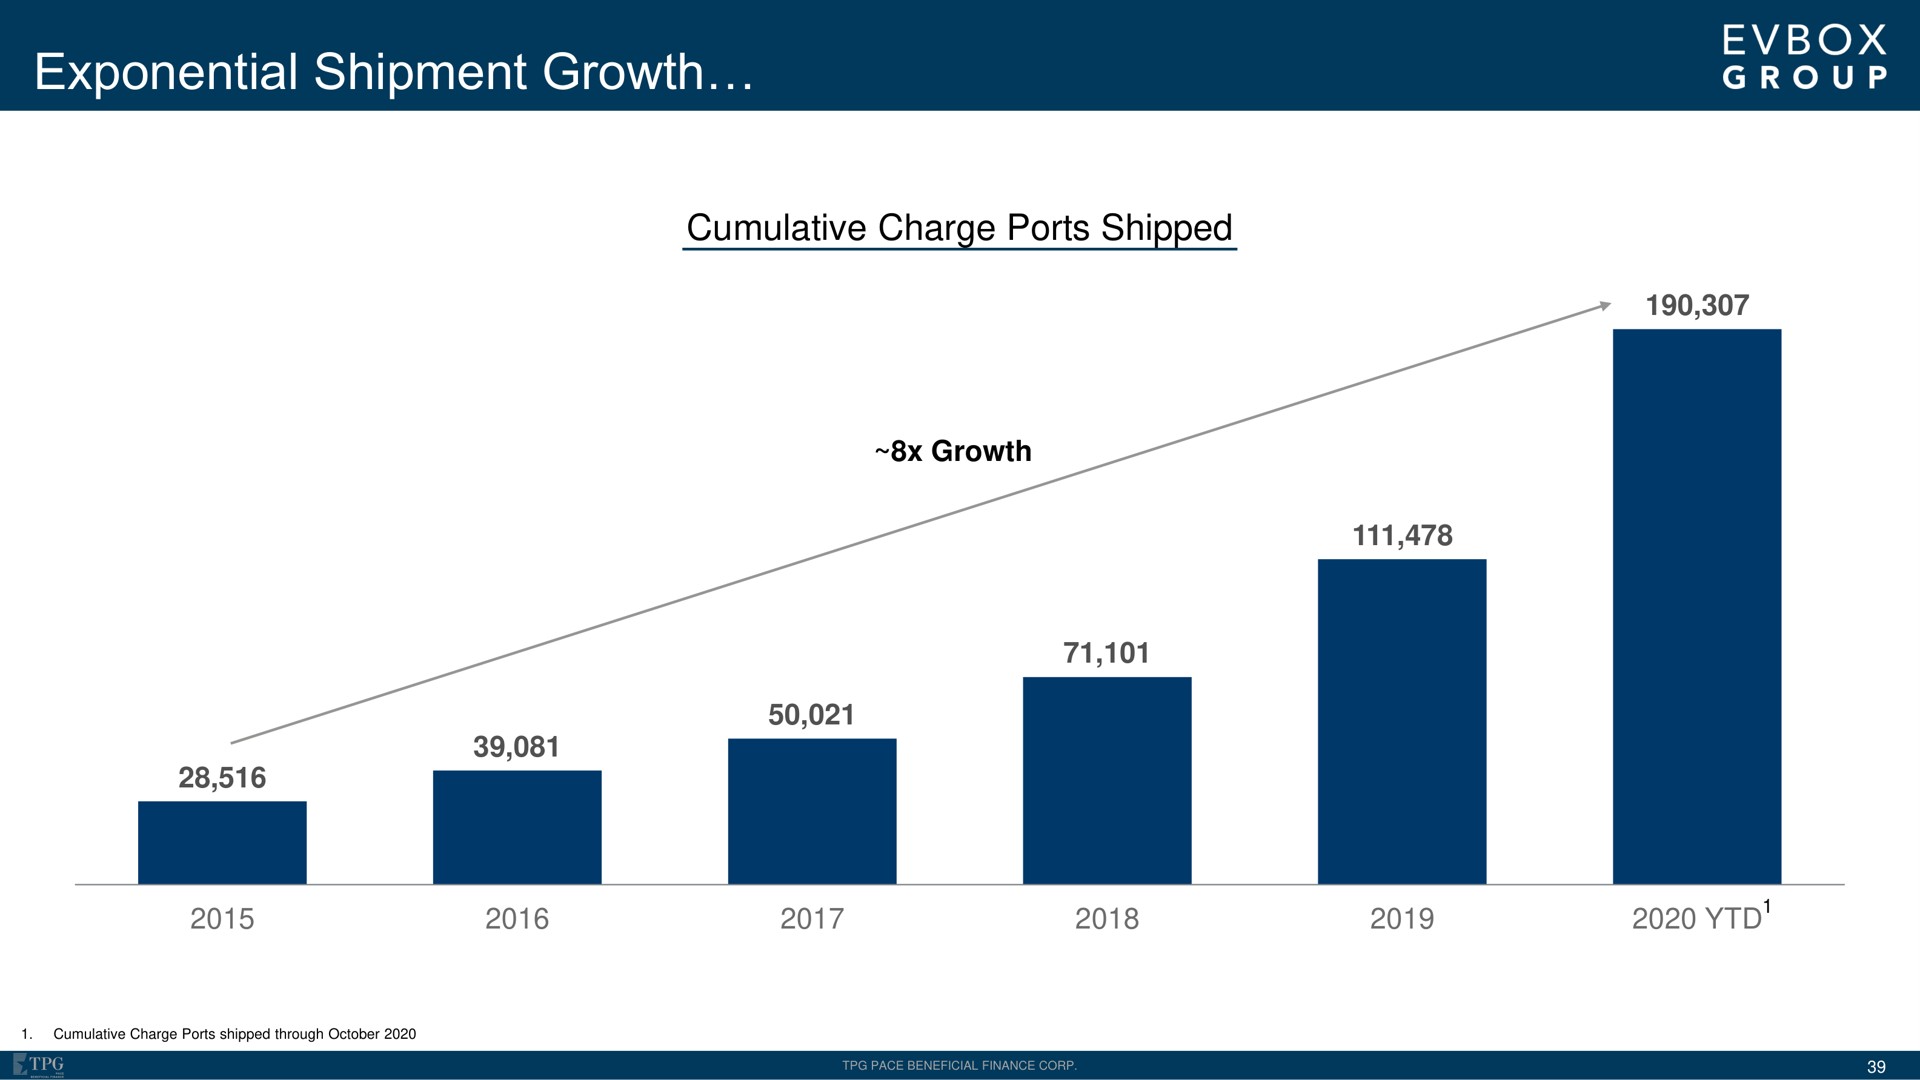 exponential shipment growth cumulative charge ports shipped | EVBox